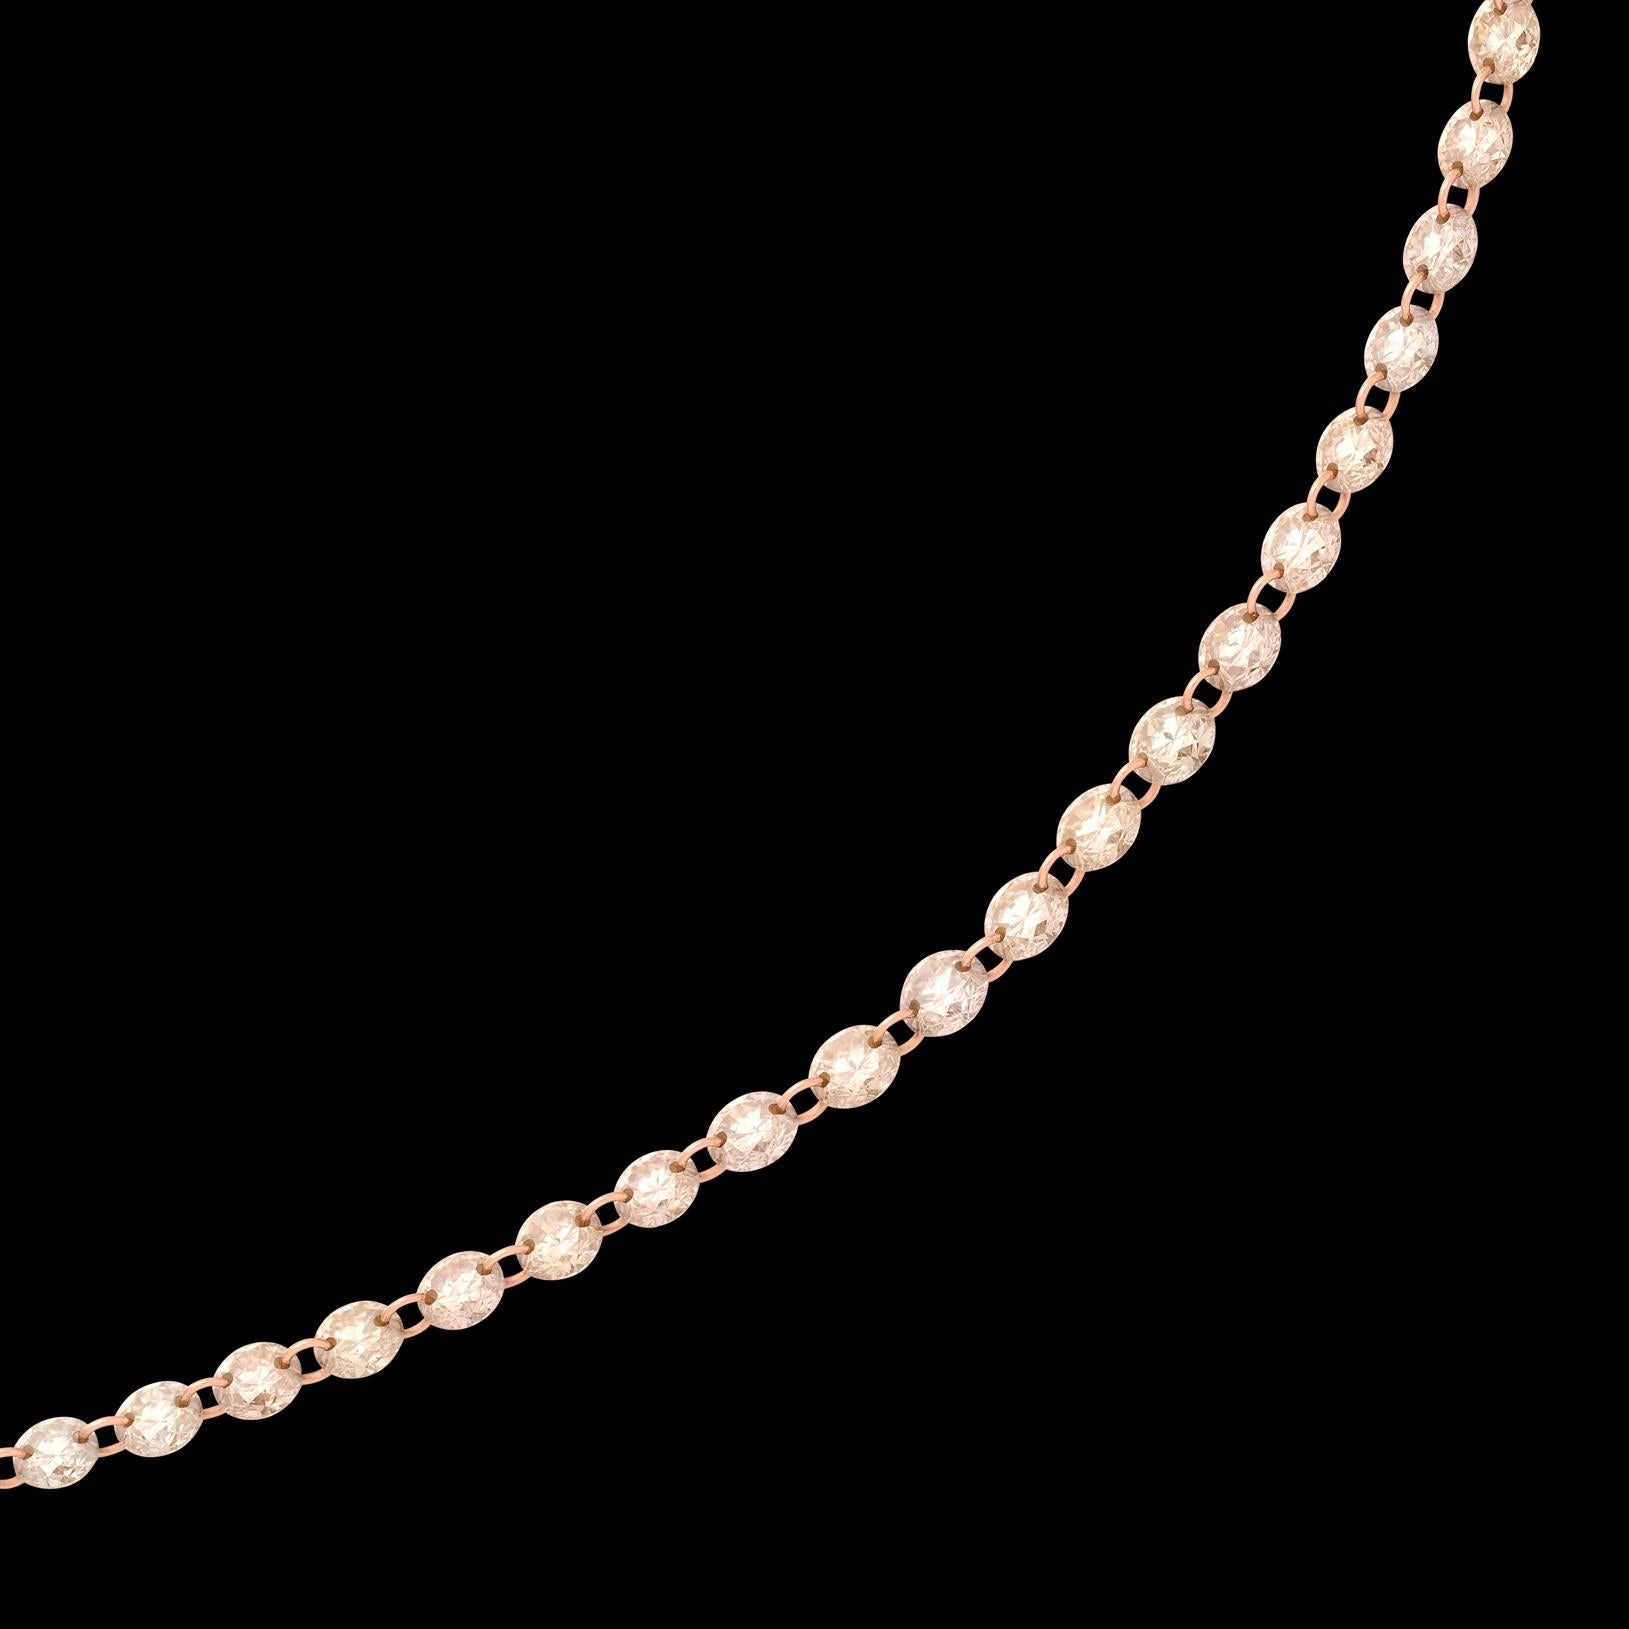 Your new favorite necklace! This 18 karat Rose Gold stunner features 84 expertly cut briolette diamonds for 4.10 carats total weight. The diamonds are linked together with the rose gold via tiny drill holes in the edge of each stone, giving the